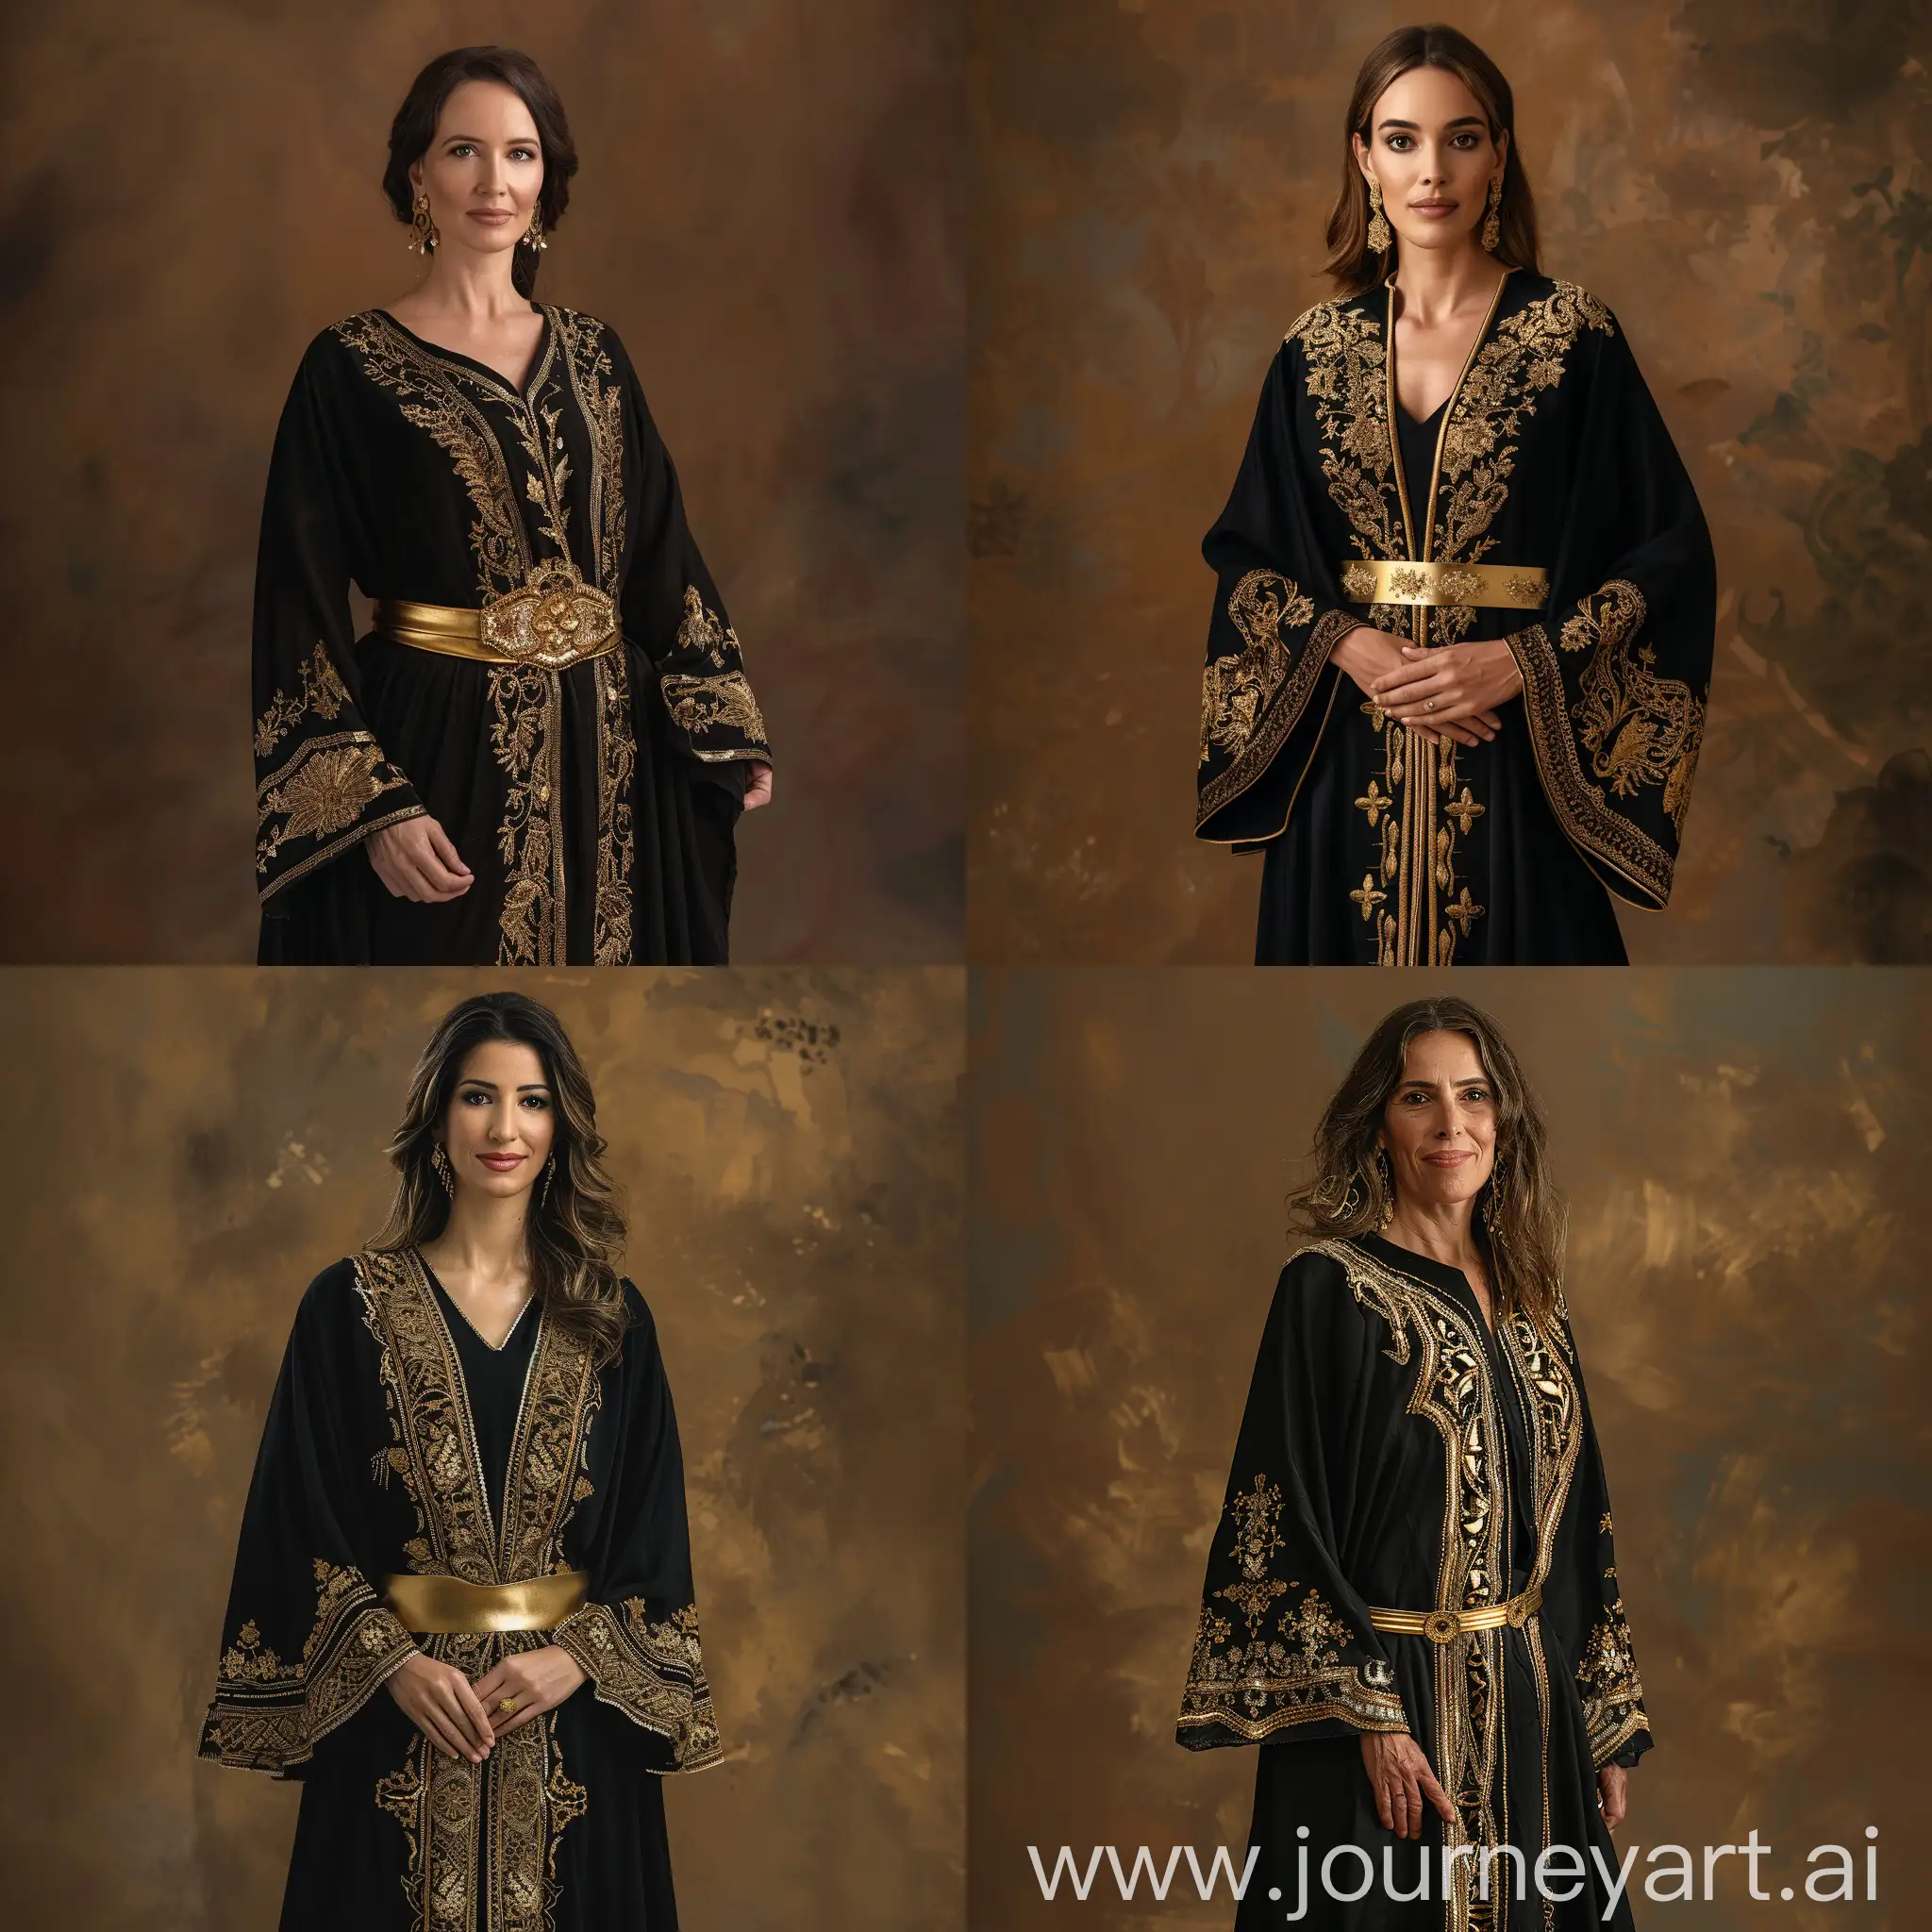 Elegant-30YearOld-Woman-in-Moroccan-Caftan-with-Gold-Embroidery